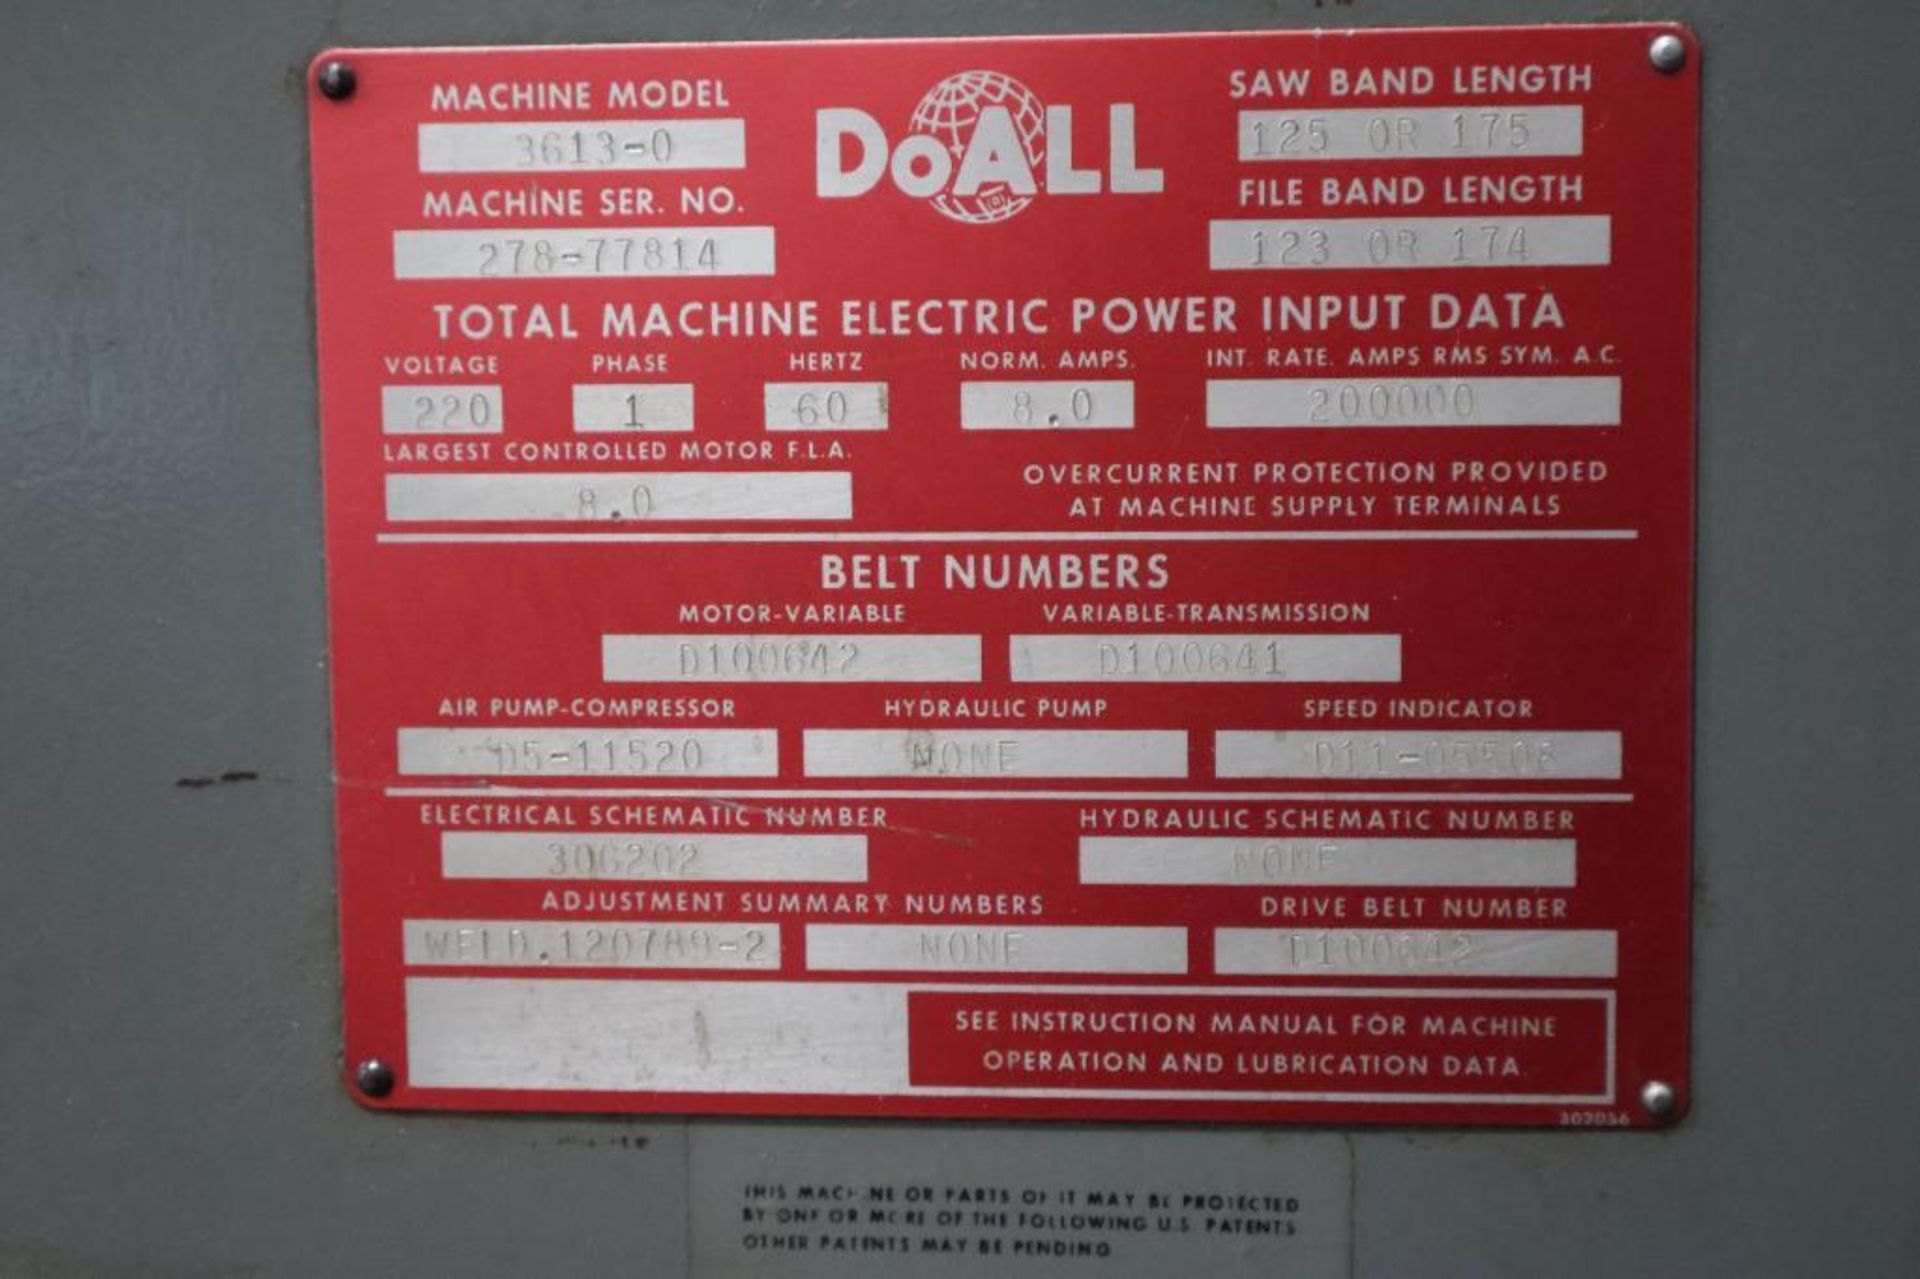 DoAll 3613-0 36" vertical bandsaw 1PH - Image 9 of 20